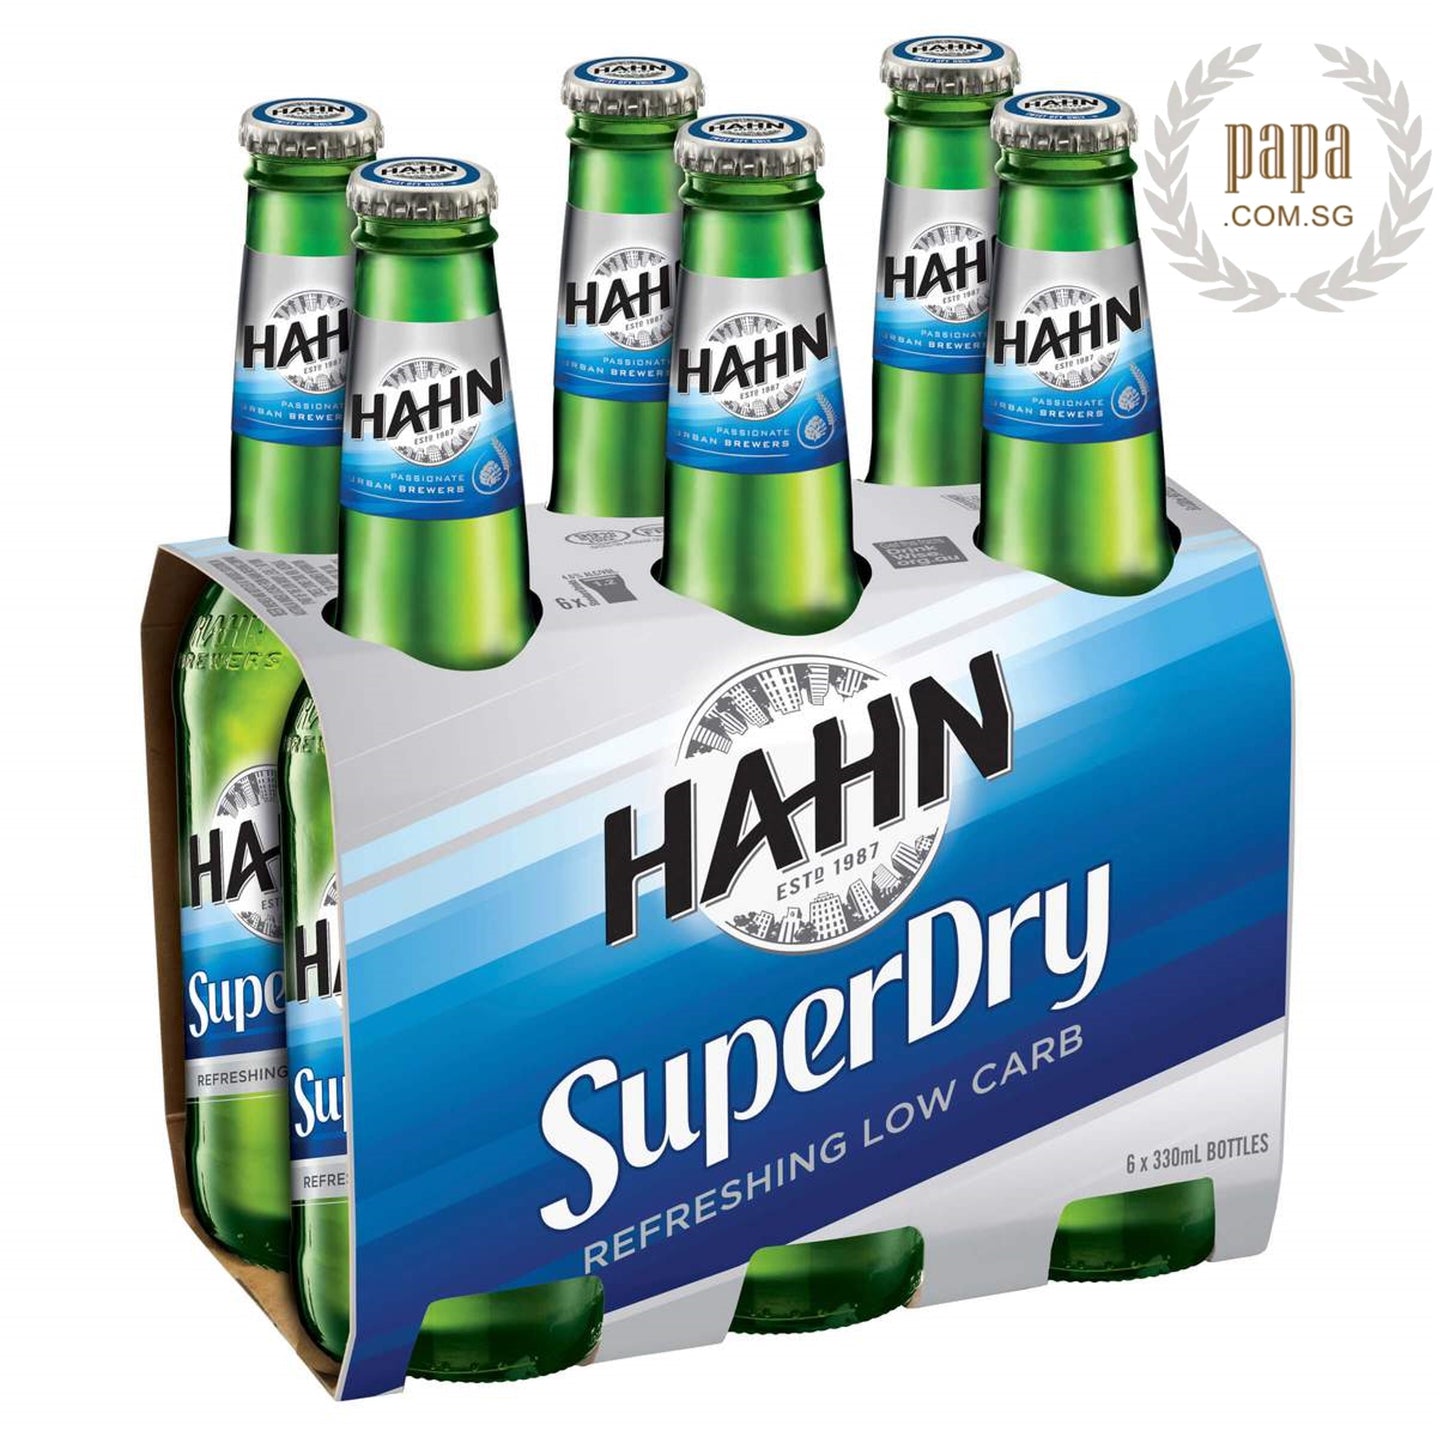 Hahn Superdry - Low Carb Australian Lager